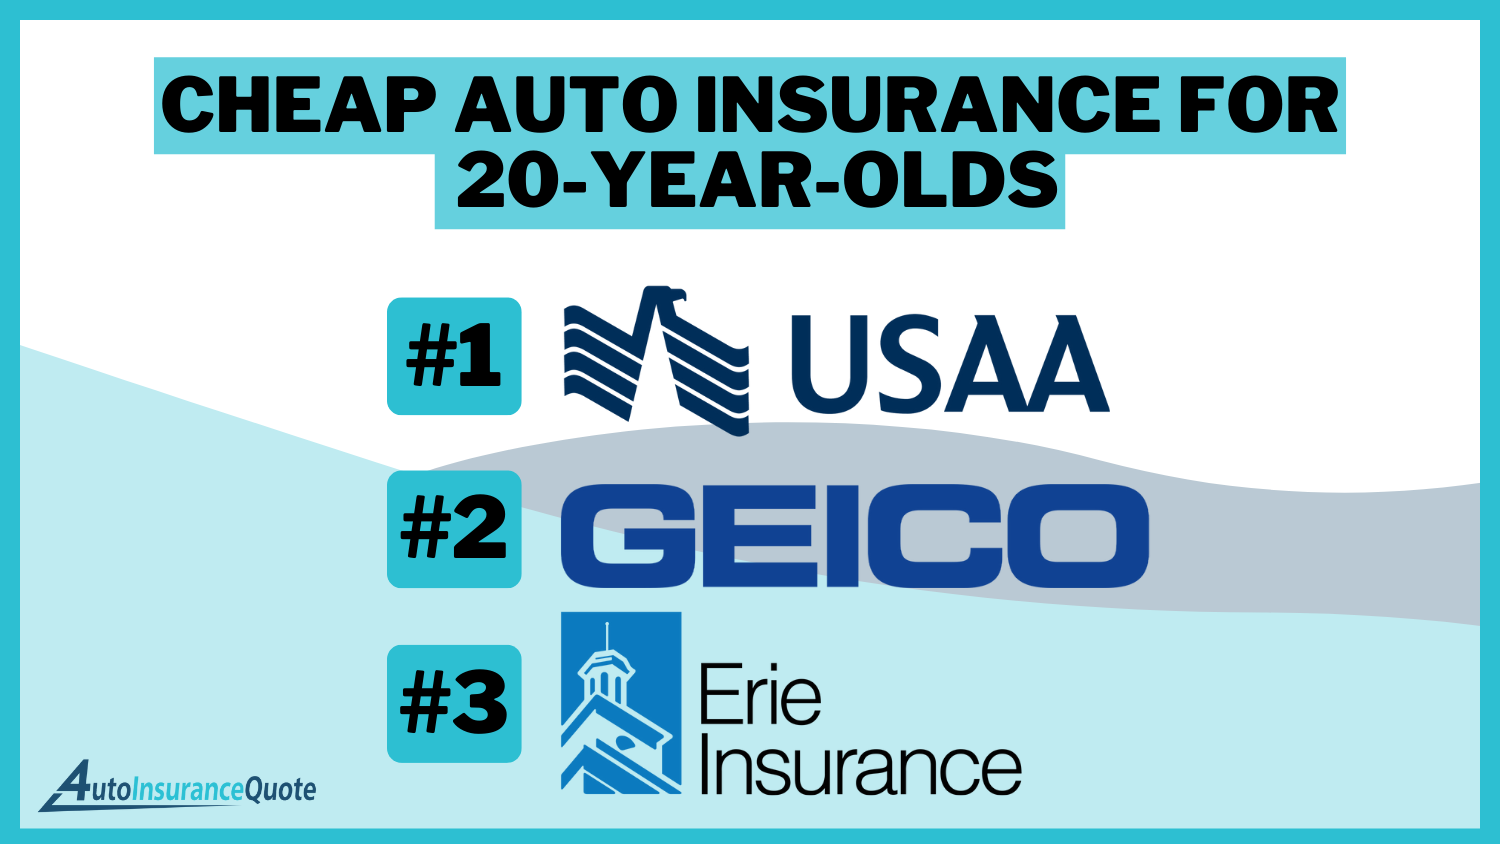 Cheap Auto Insurance for 20-Year-Olds: USAA, Geico, Erie